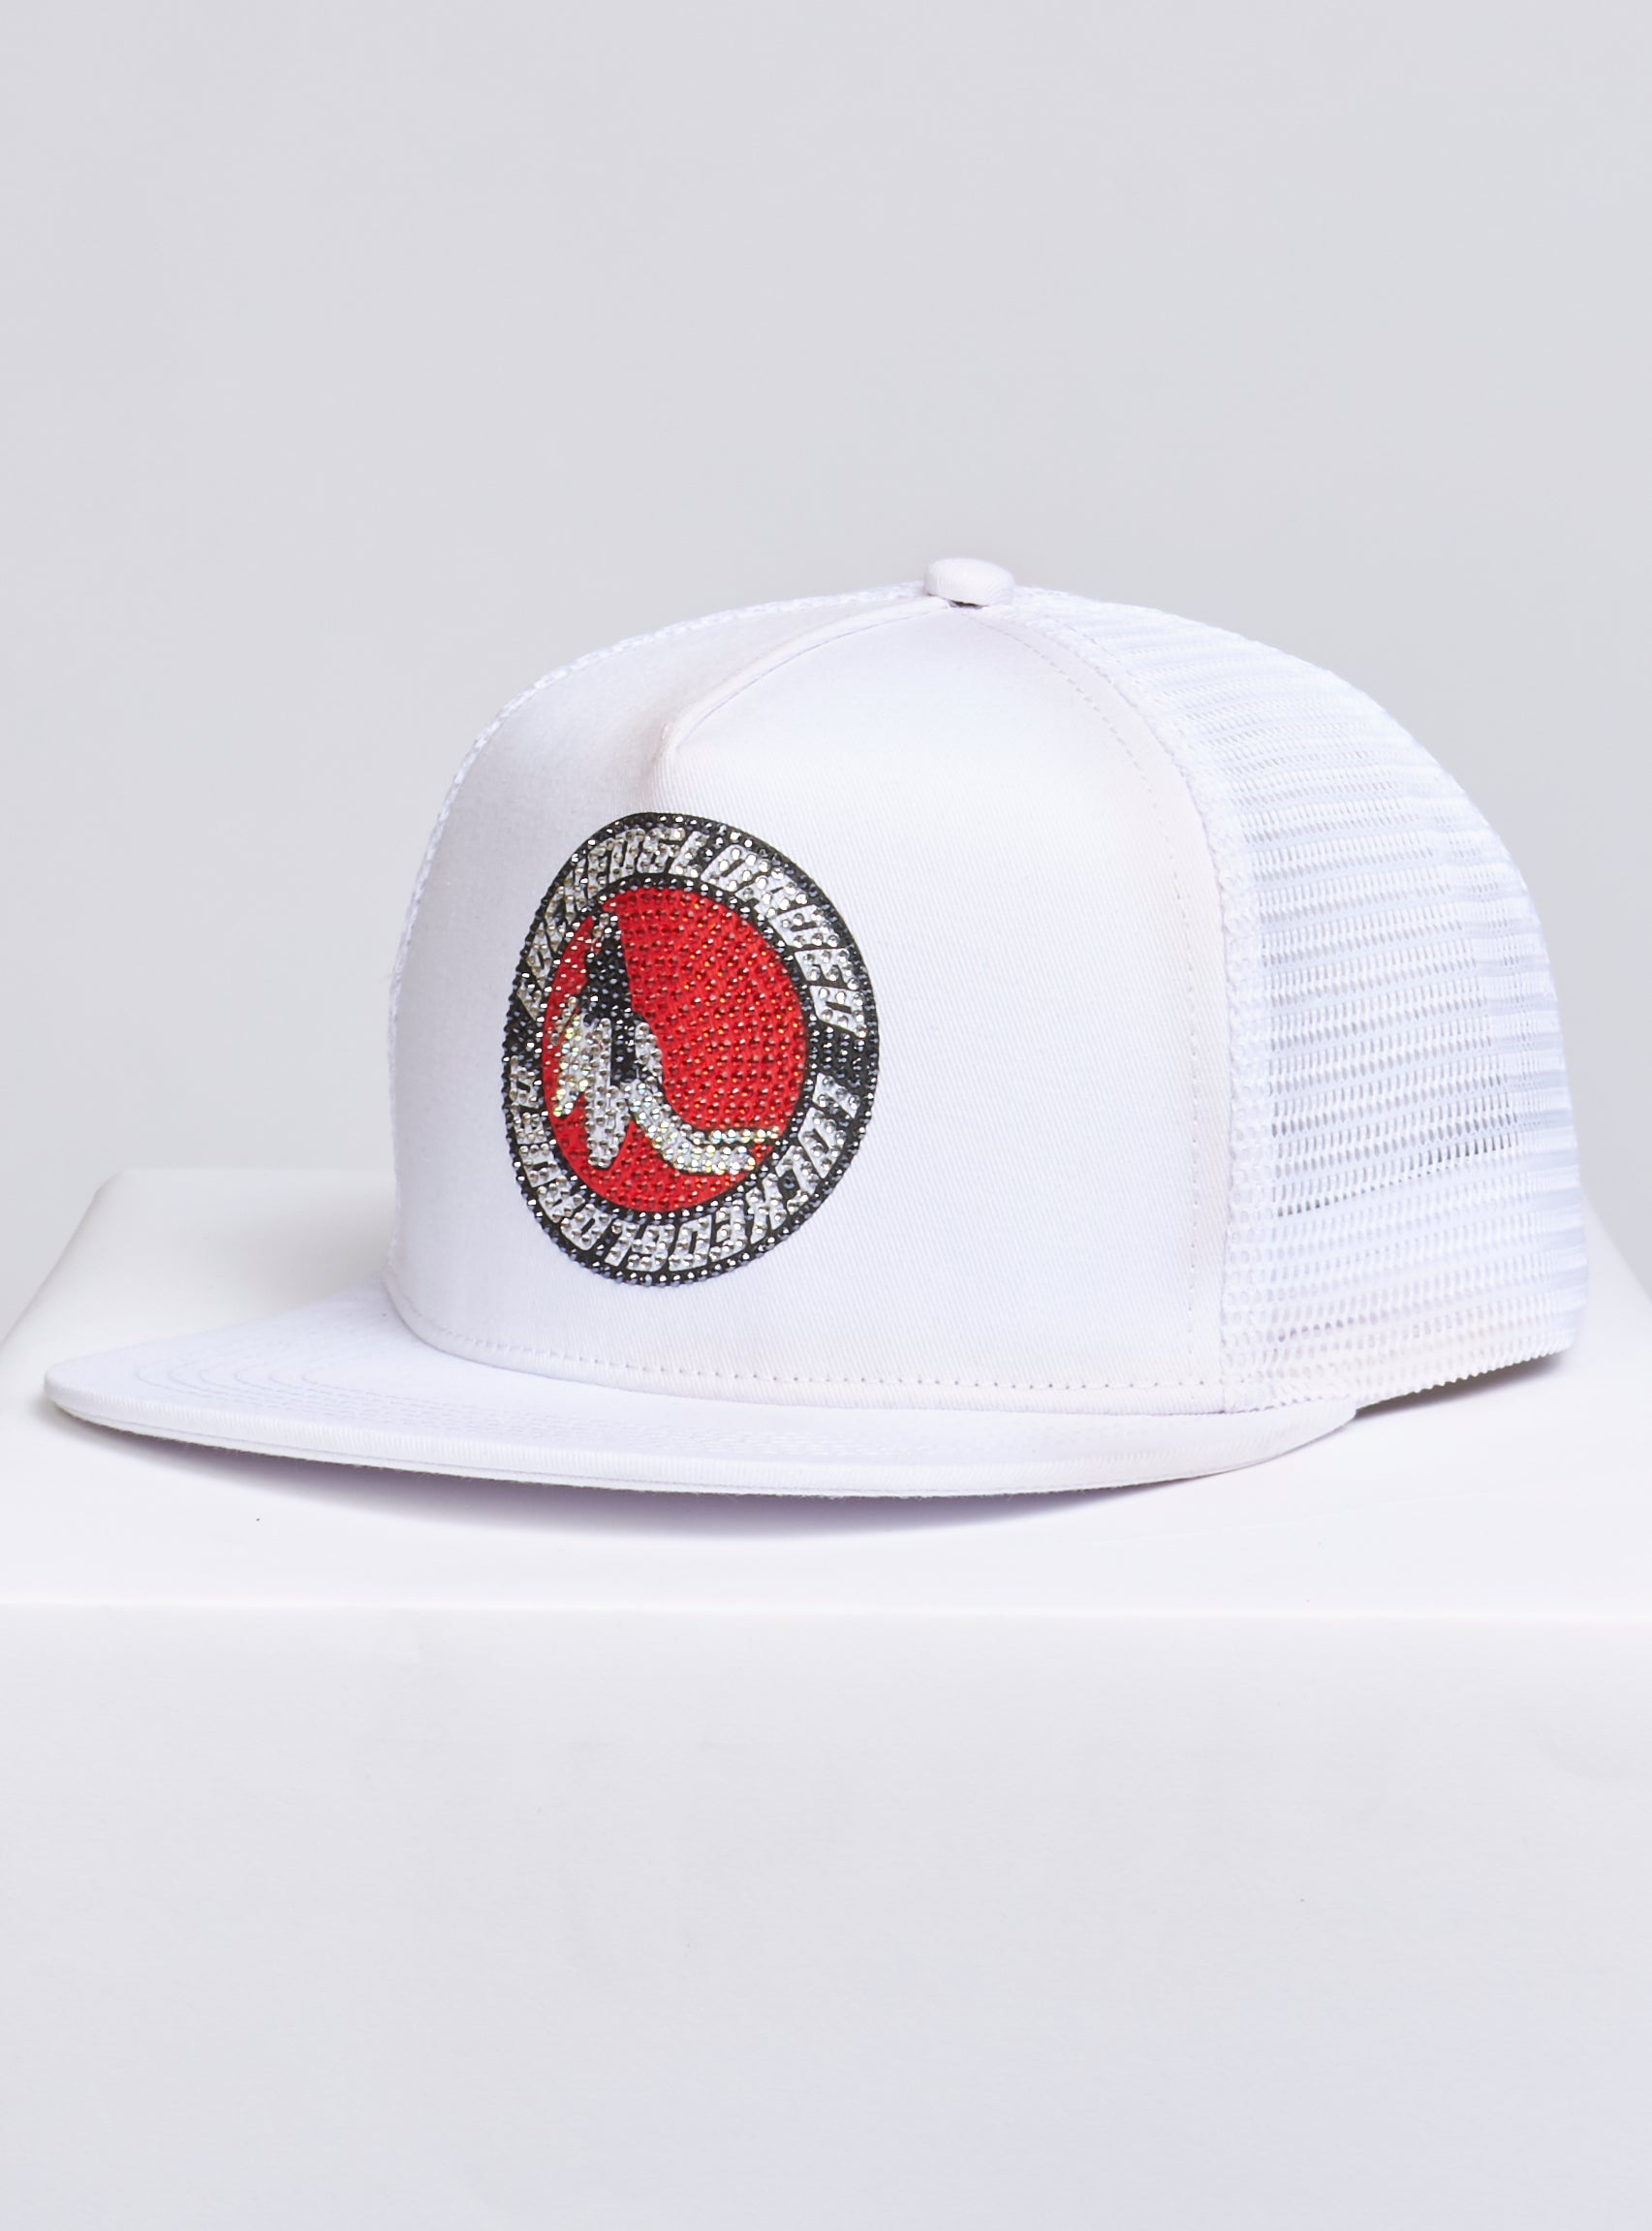 Locked & Loaded Snapback - B. Clip - Black with Red on White - 103